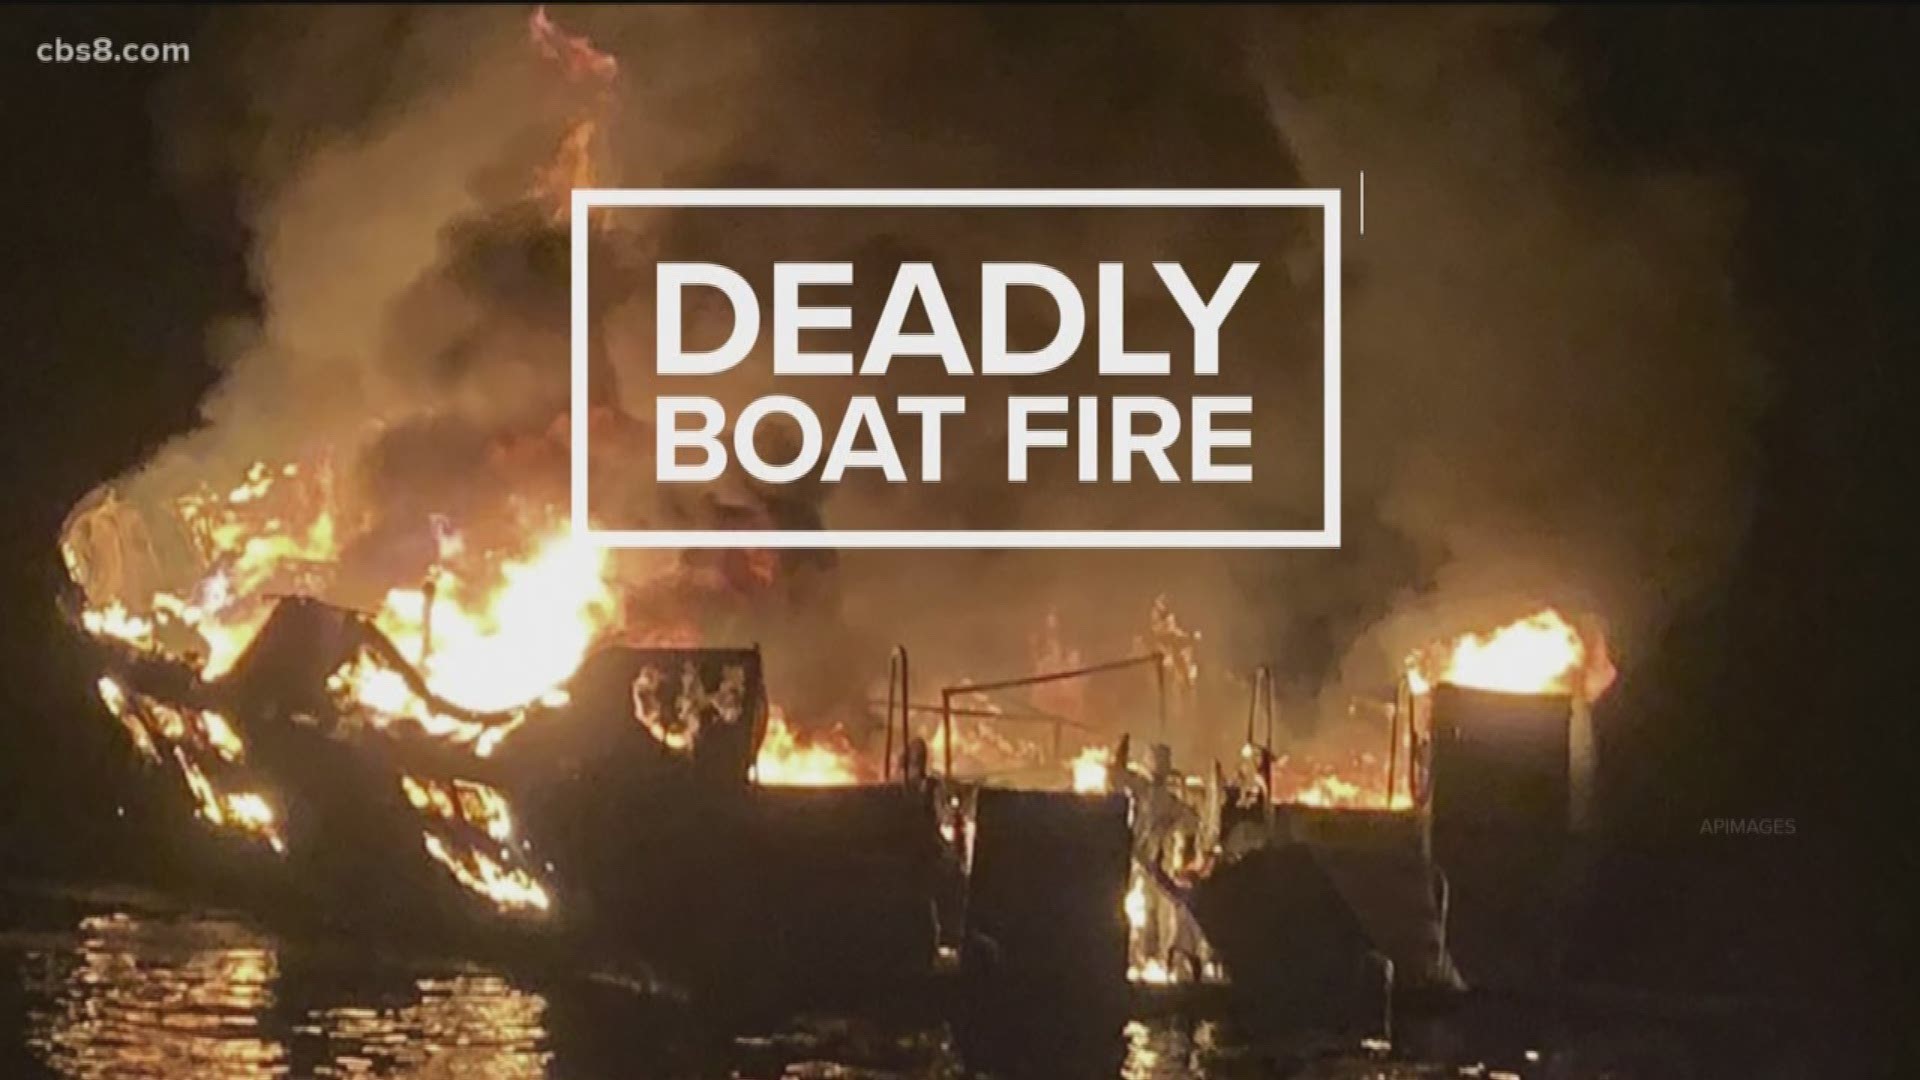 A San Diego-based dive boat owner says when it comes to safety, protocols are the same across the board including annual Coast Guard checks and monthly fire drills.